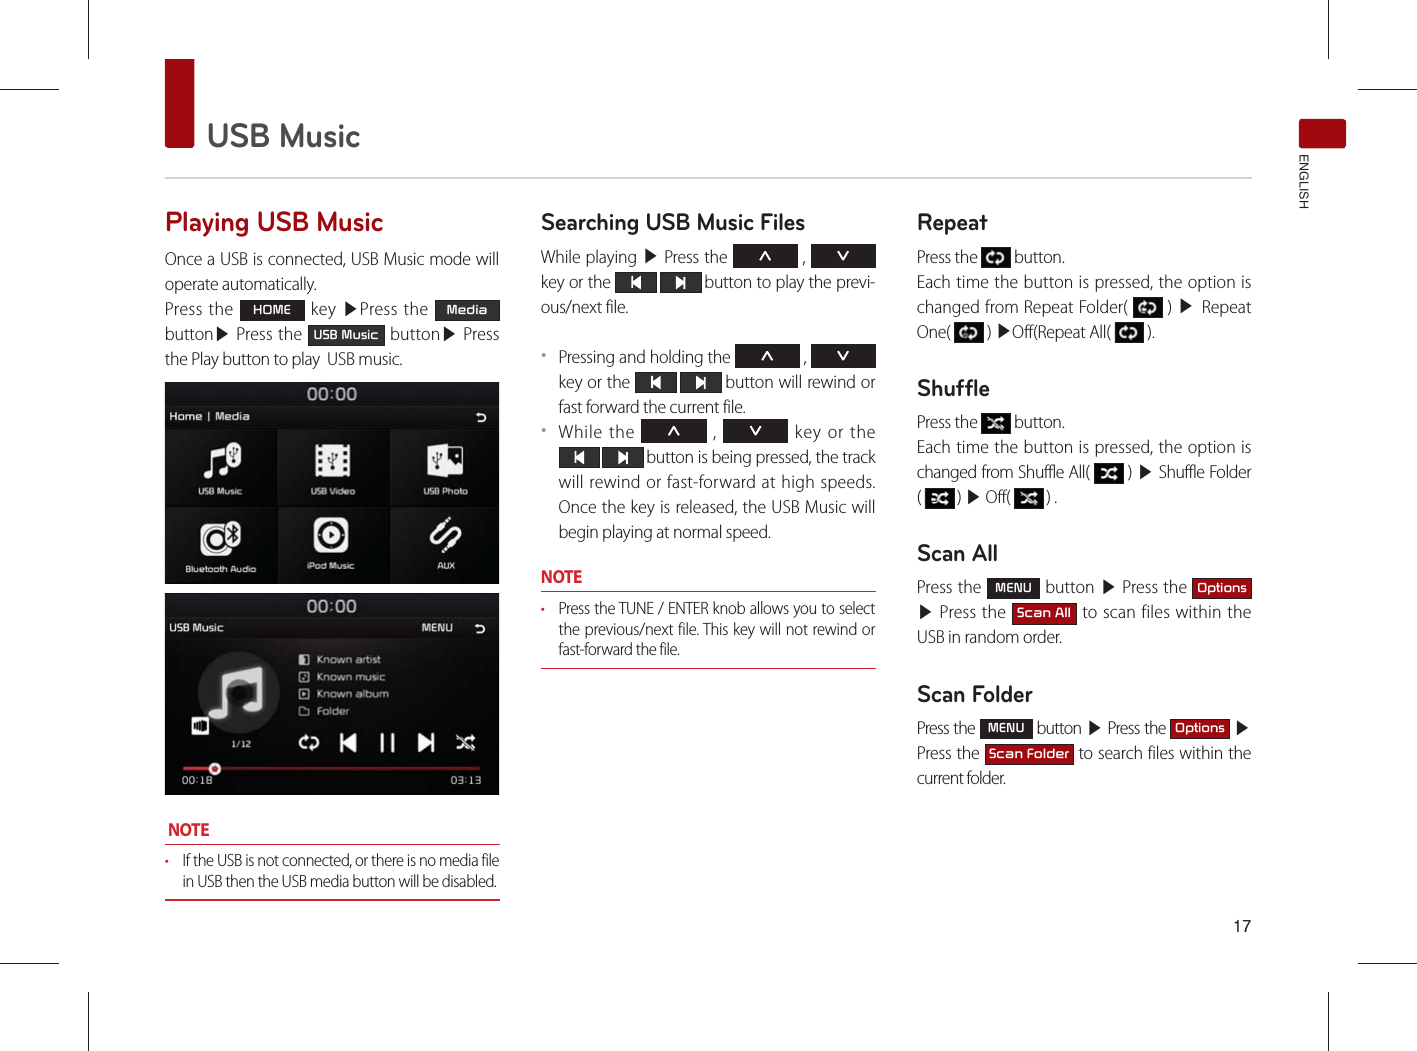 USB MusicENGLISHPlaying USB Music Once a USB is connected, USB Music mode will operate automatically.Press the +20( key ▶Press the 0HGLD button▶ Press the 86%0XVLF button▶ Press the Play button to play  USB music. NOTEr If the USB is not connected, or there is no media file in USB then the USB media button will be disabled. Searching USB Music FilesWhile playing ▶ Press the Ѧ , ѧ  key or the    button to play the previ-ous/next file. ˍPressing and holding the Ѧ , ѧ key or the    button will rewind or fast forward the current file.ˍWhile the Ѧ , ѧ key or the   button is being pressed, the track will rewind or fast-forward at high speeds. Once the key is released, the USB Music will begin playing at normal speed.NOTEr Press the TUNE / ENTER knob allows you to select the previous/next file. This key will not rewind or fast-forward the file.RepeatPress the   button.Each time the button is pressed, the option is changed from Repeat Folder(   ) ▶ Repeat One(   ) ▶Off(Repeat All(   ).ShufflePress the   button.Each time the button is pressed, the option is changed from Shuffle All(   ) ▶  Shuffle  Folder    (   ) ▶ Off(   ) .Scan AllPress the 0(18 button ▶ Press the 2SWLRQV ▶ Press the 6FDQ$OO to scan files within the USB in random order.Scan FolderPress the 0(18 button ▶ Press the 2SWLRQV ▶ Press the 6FDQ)ROGHU to search files within the current folder.